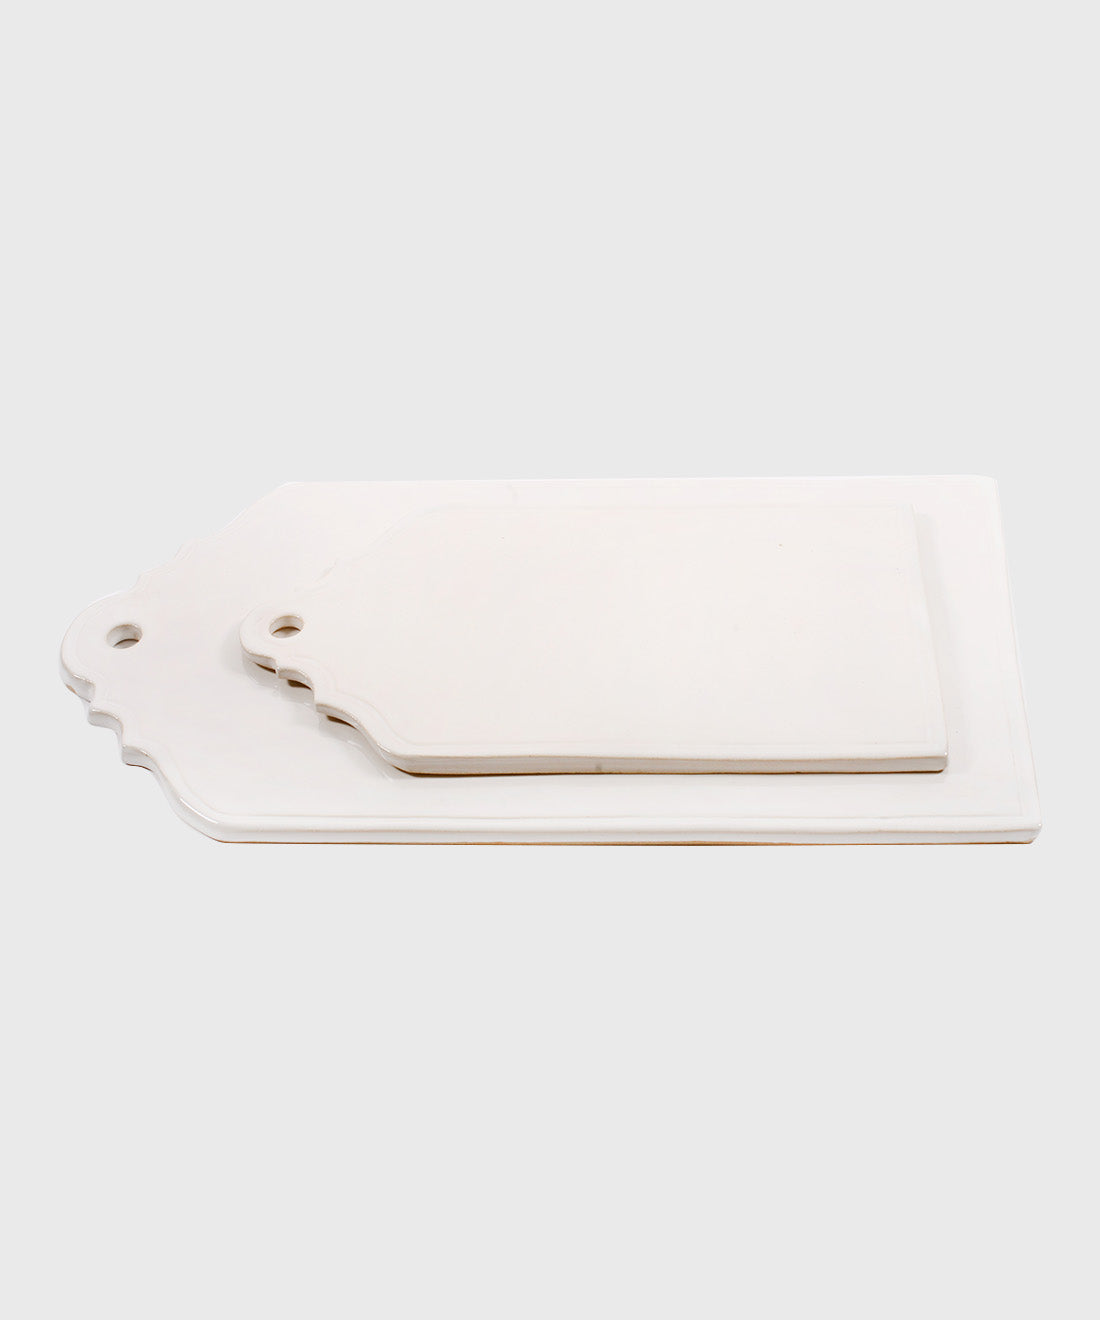 Large Ceramic Cheese Board in White